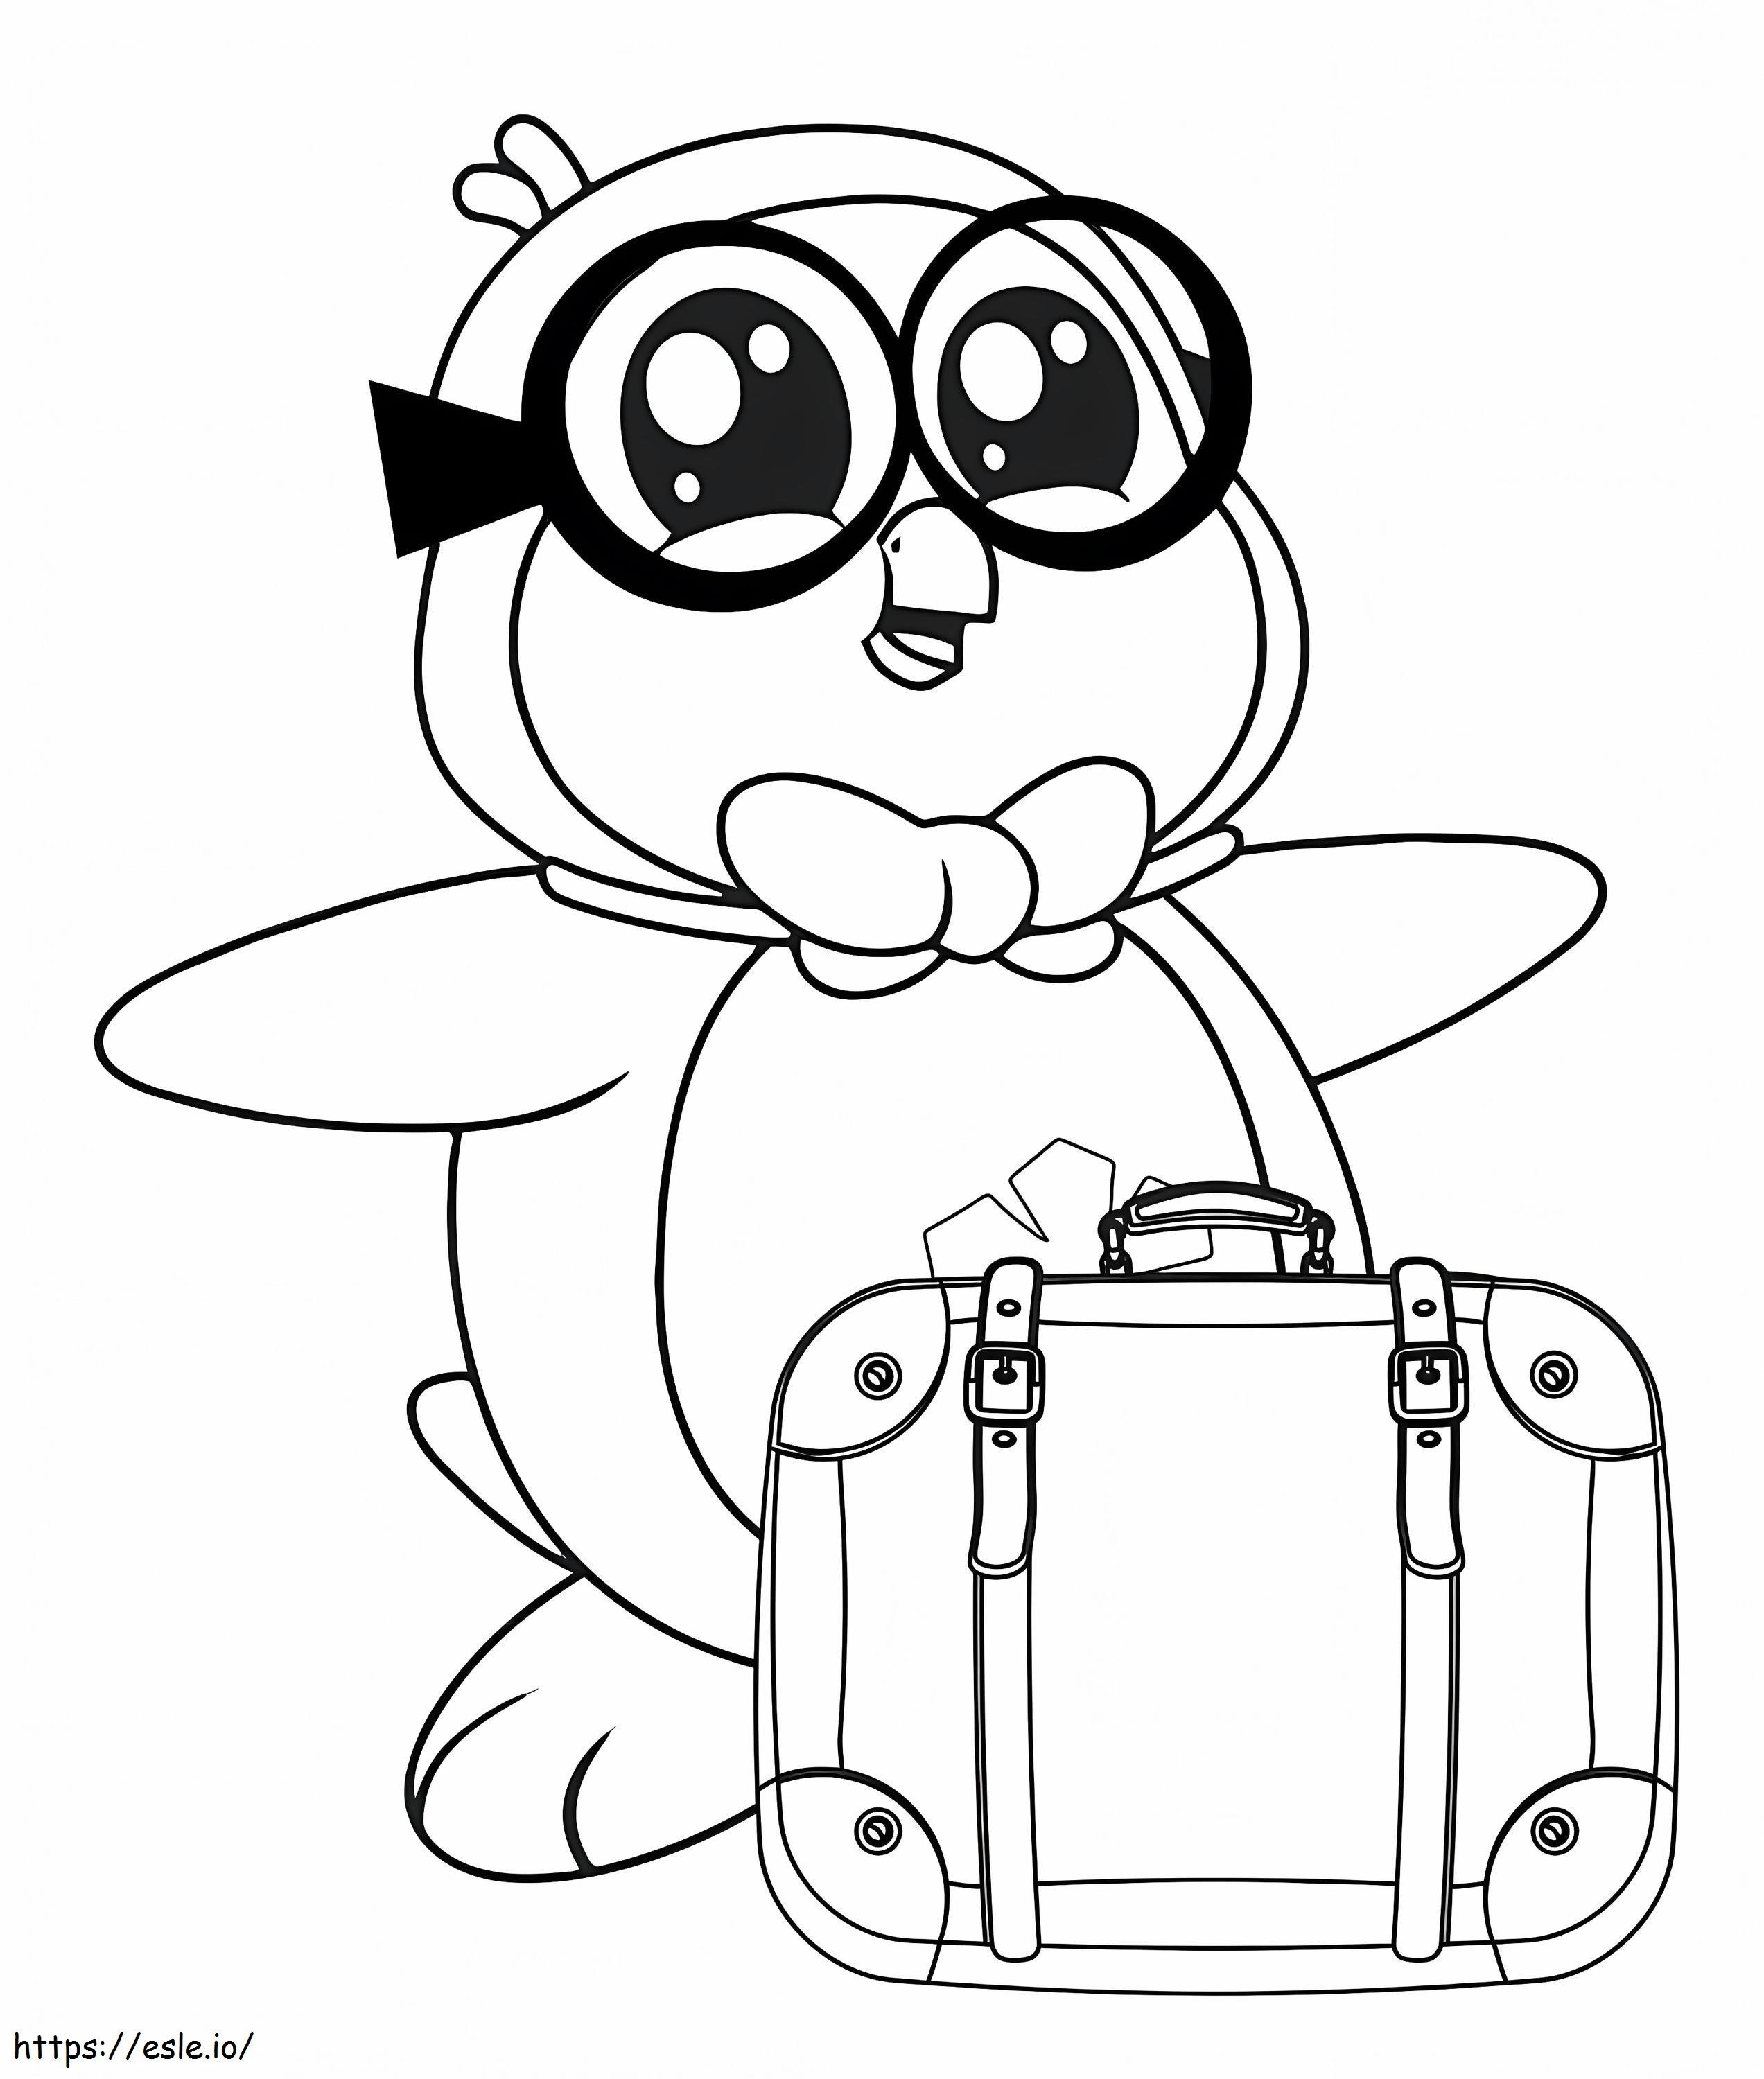 Peck From Ryans World coloring page